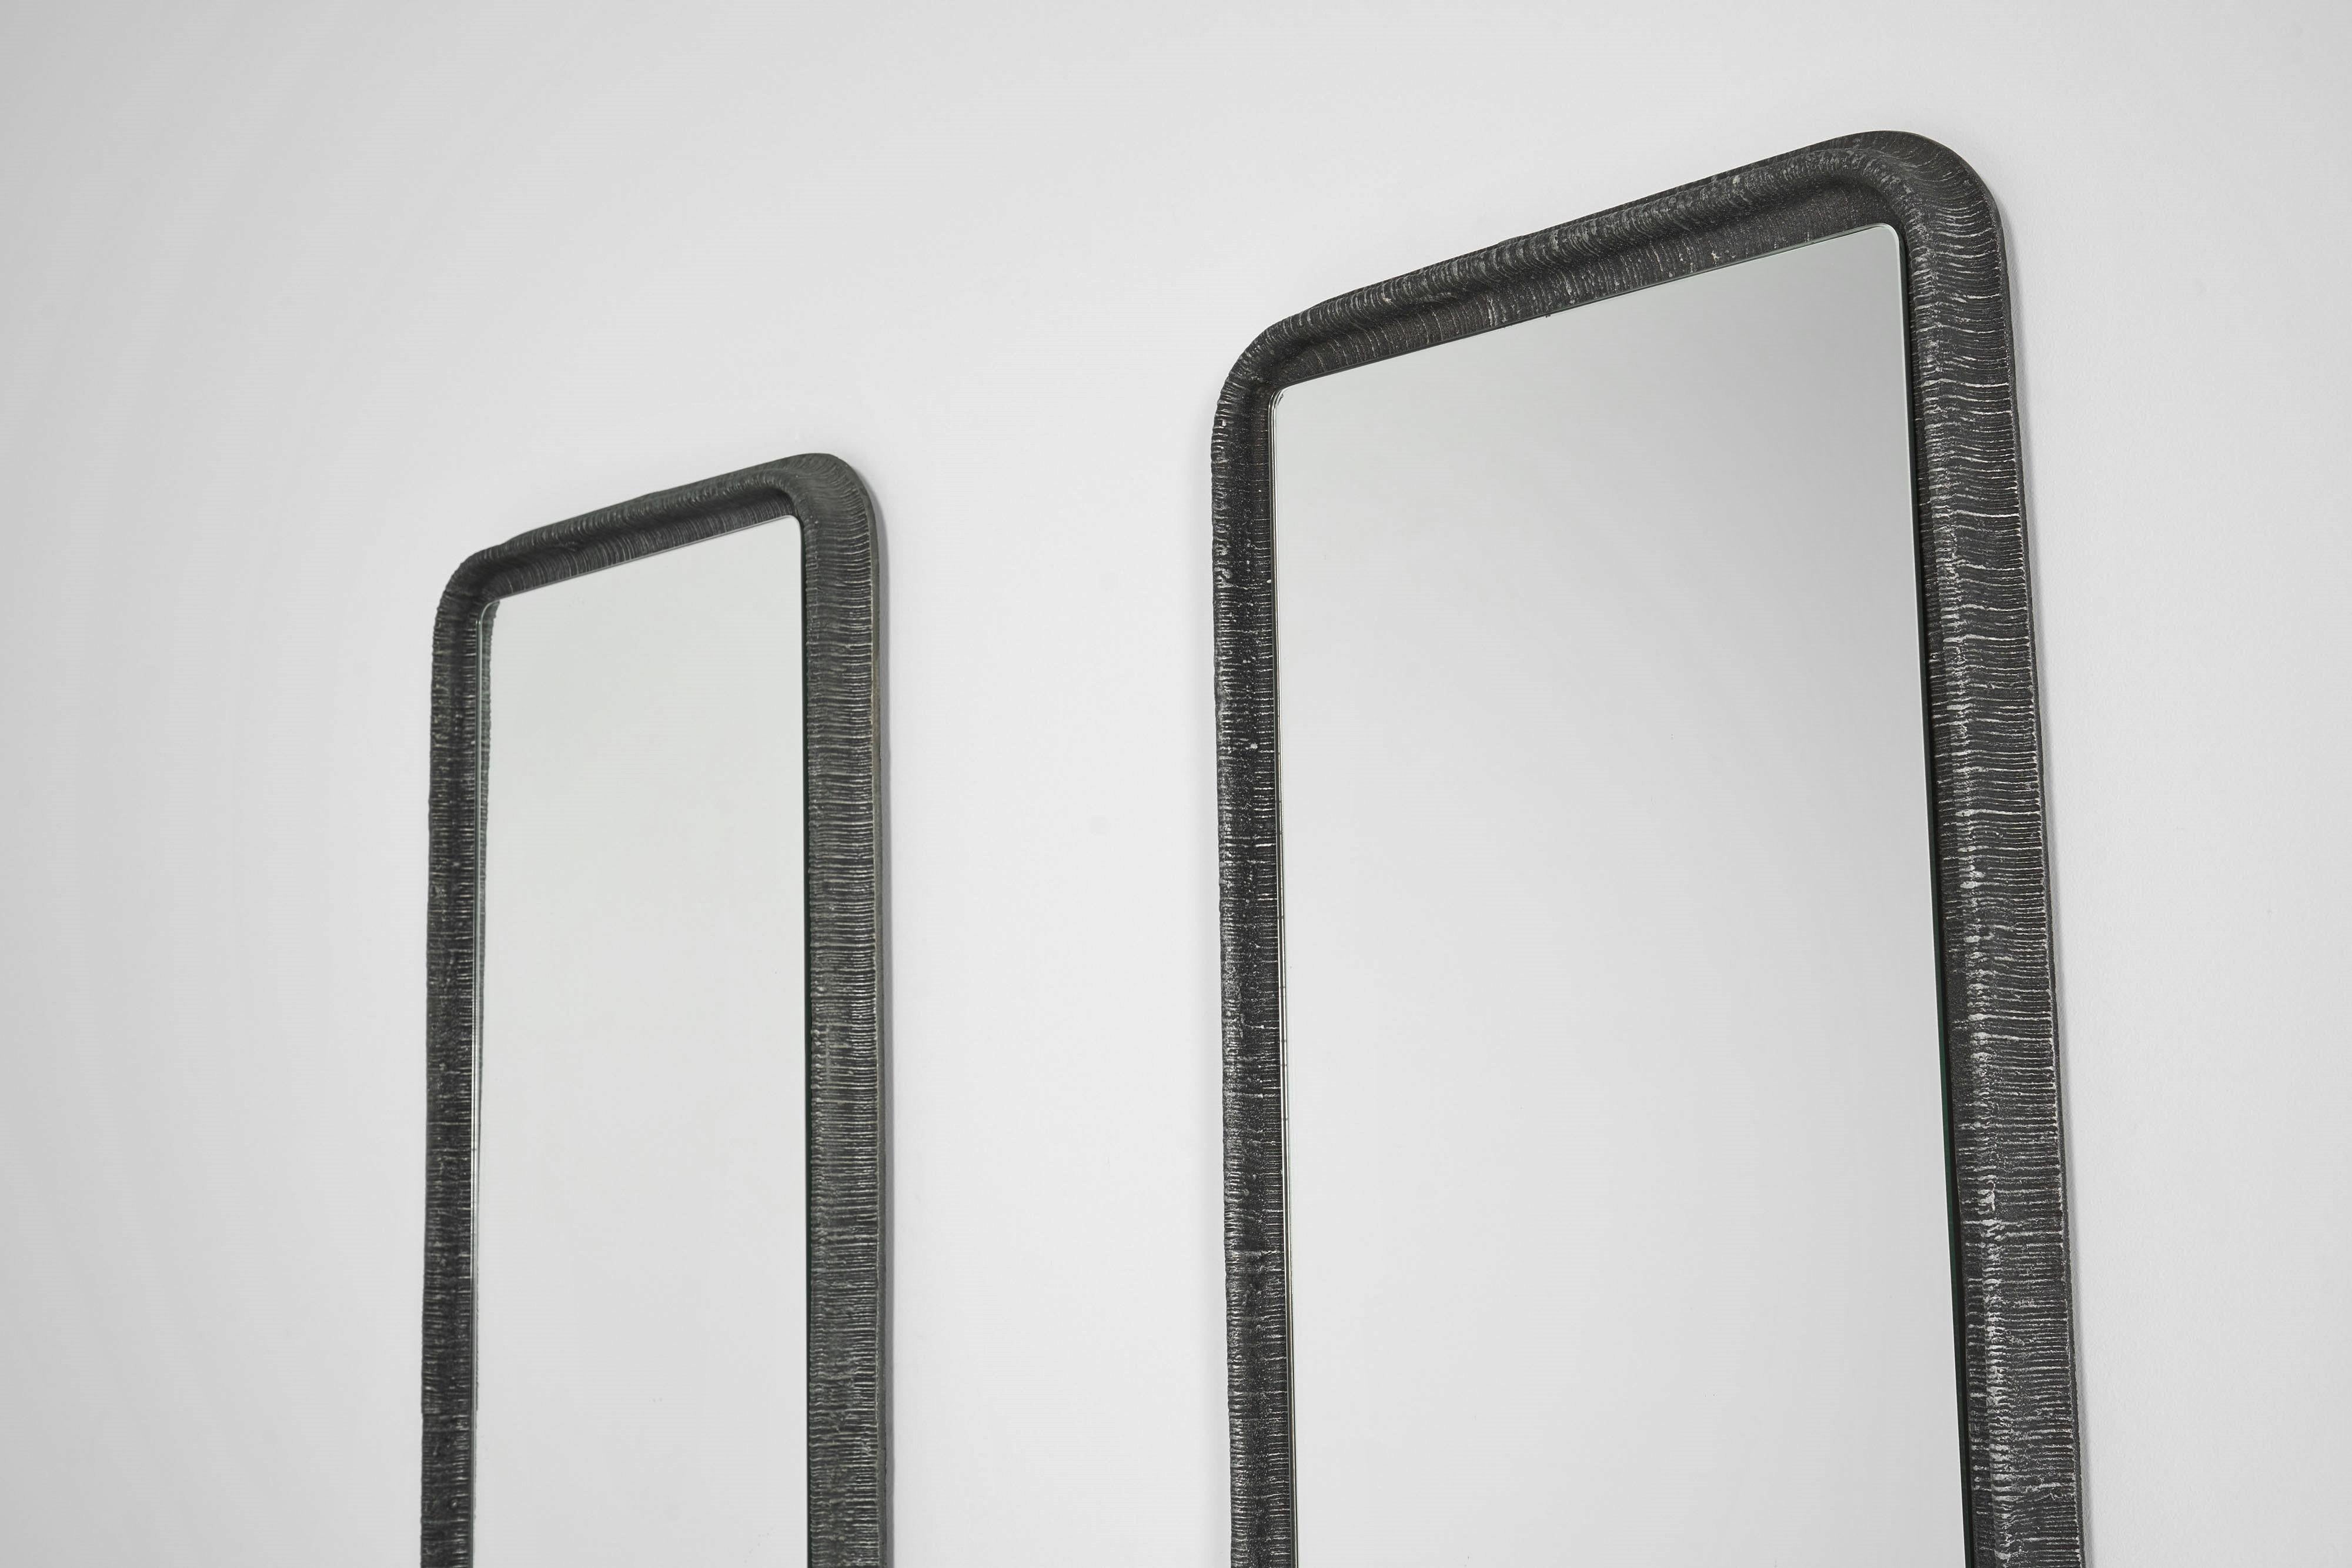 Great Lorenzo Burchiellaro wall mirrors, created in Italy in 1975. These mirrors are a true artistic marvel with their distinctive ribbed cast aluminum edges. The unique feature of these mirrors is the textured edges made of ribbed cast aluminum.